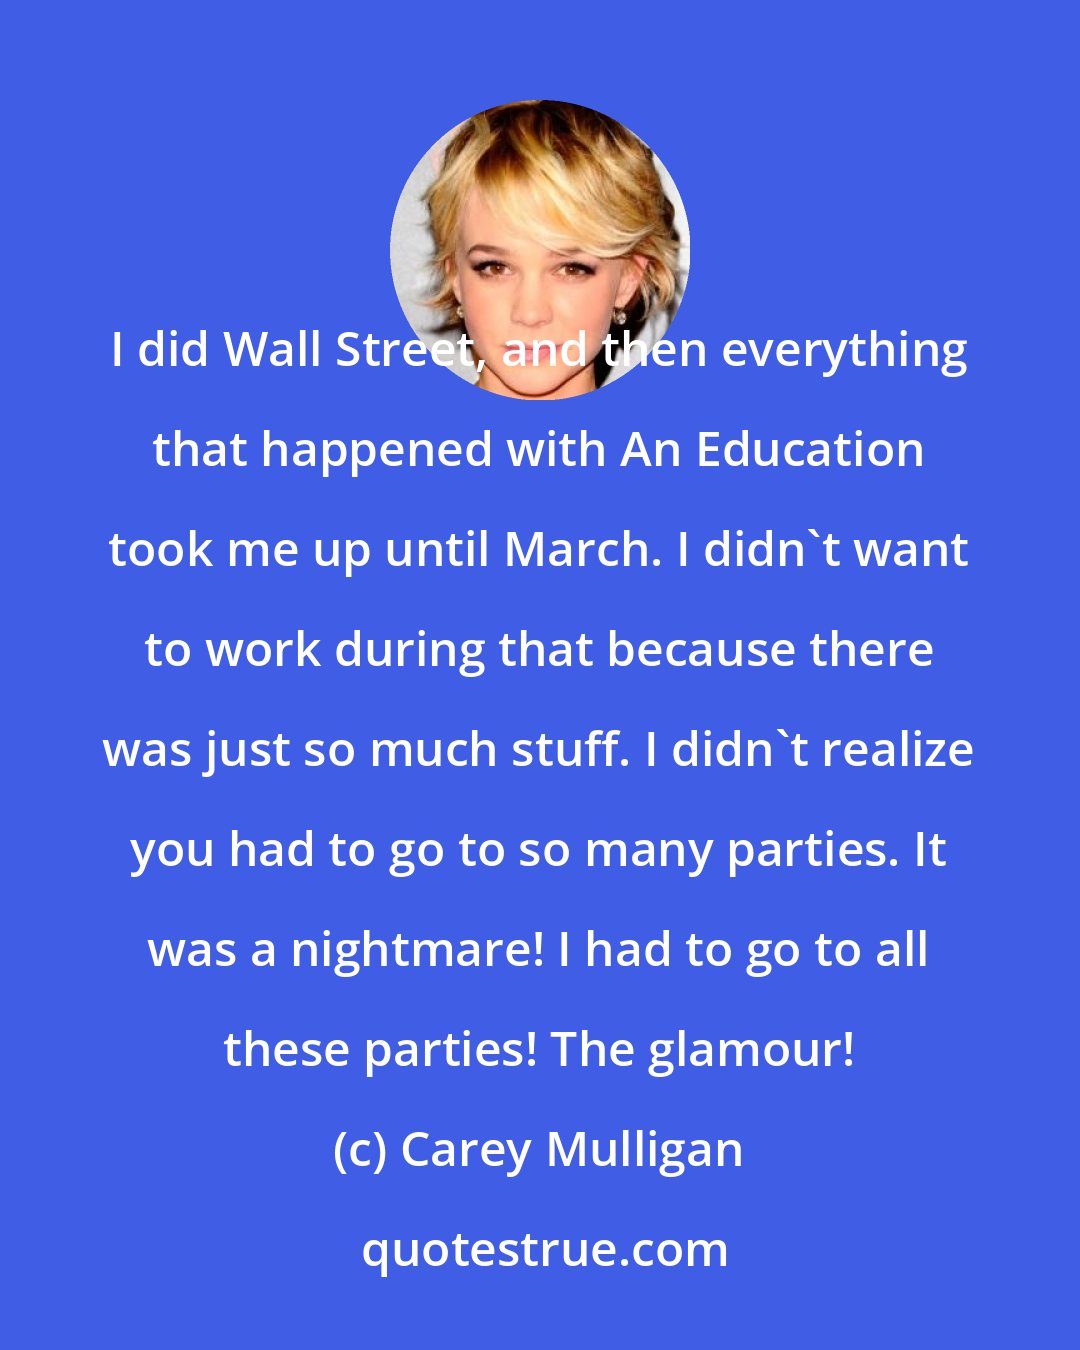 Carey Mulligan: I did Wall Street, and then everything that happened with An Education took me up until March. I didn't want to work during that because there was just so much stuff. I didn't realize you had to go to so many parties. It was a nightmare! I had to go to all these parties! The glamour!